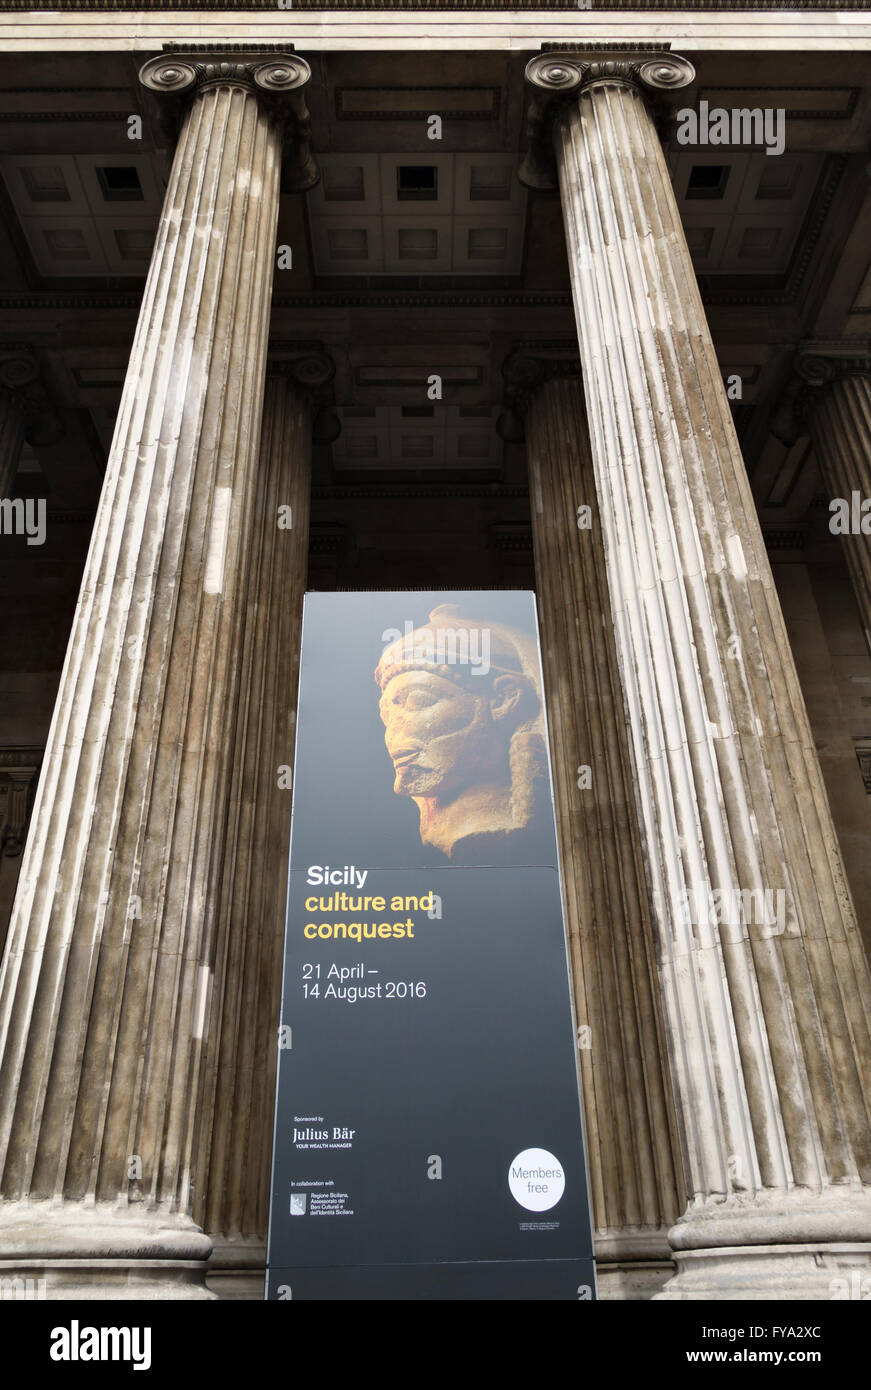 The British Museum, London, UK. Poster advertising the exhibition 'Sicily: Culture and Conquest' (21st April - 14th August 2016) Stock Photo